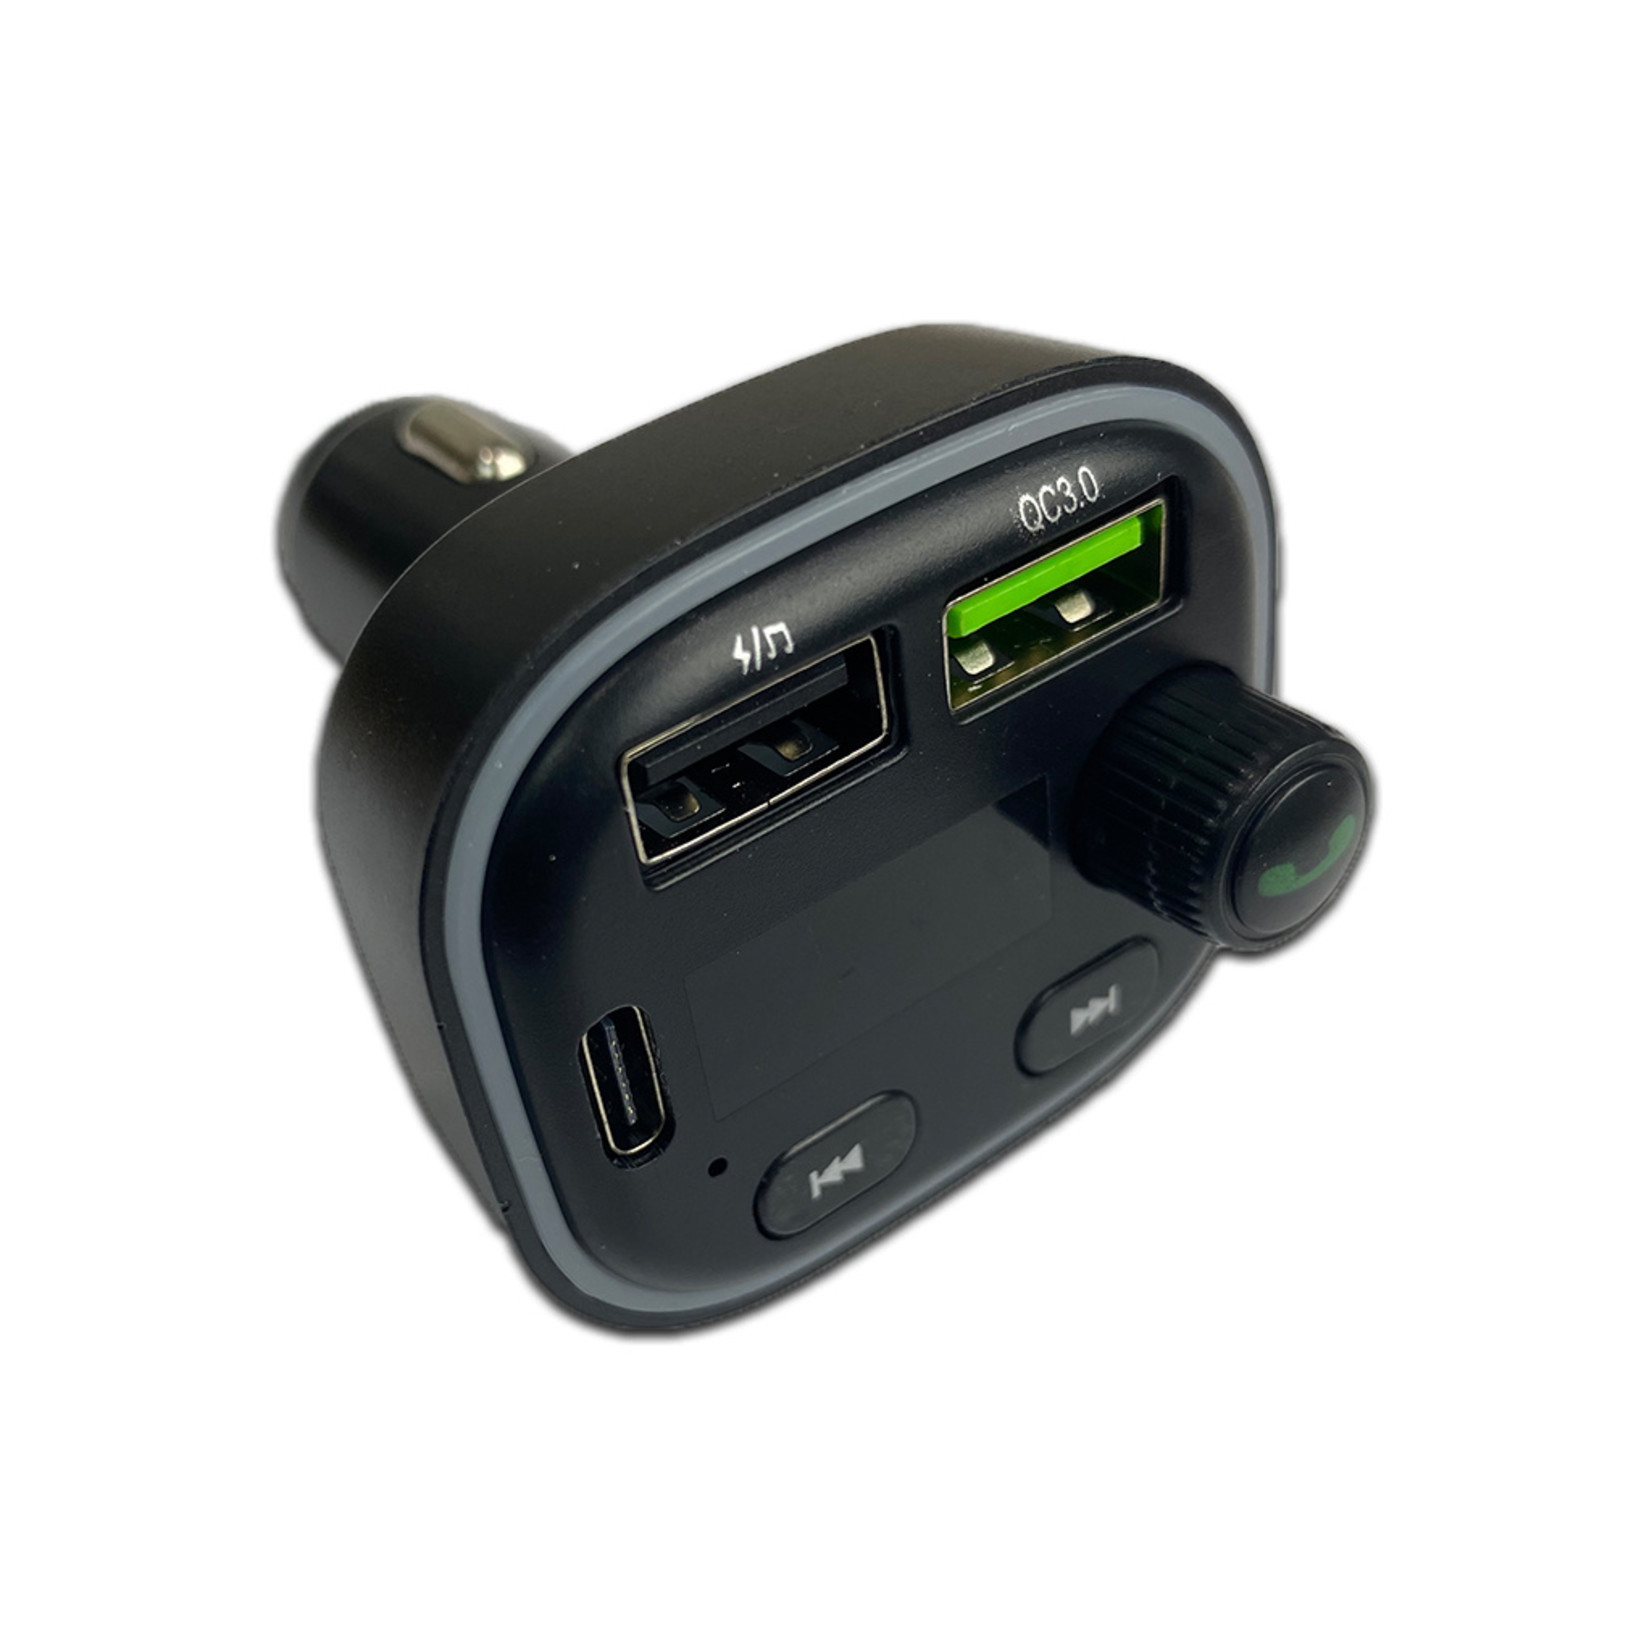 Allison 3 in 1 USB-C FM Transmitter with Dual USB Ports (ALS-A351)